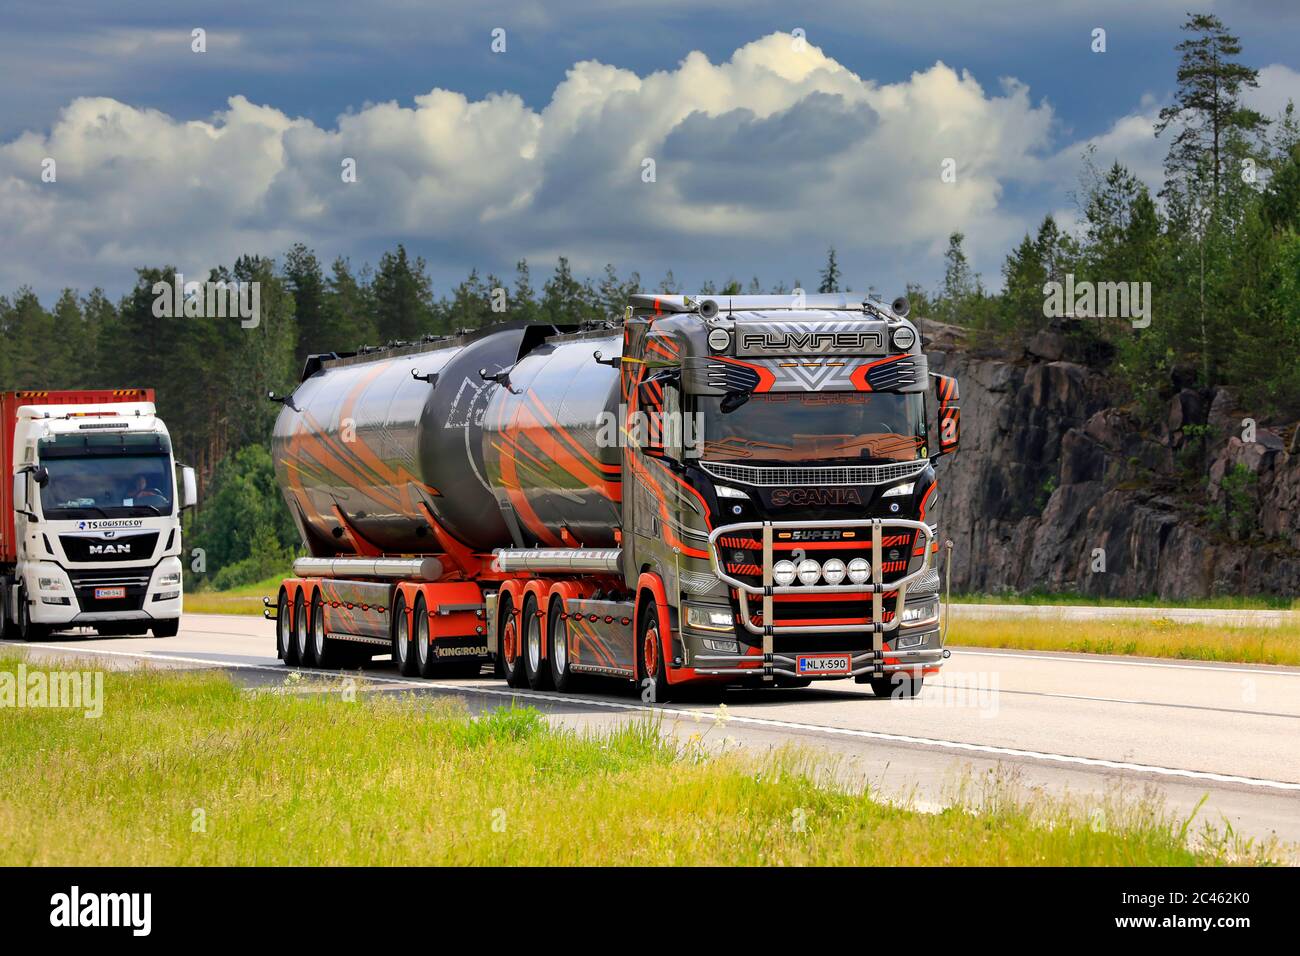 Scania S650 truck 2019 Kuljetus Auvinen Oy for bulk transport trucking along motorway on a day of summer. Paimio, Finland. June 16, 2020. Stock Photo